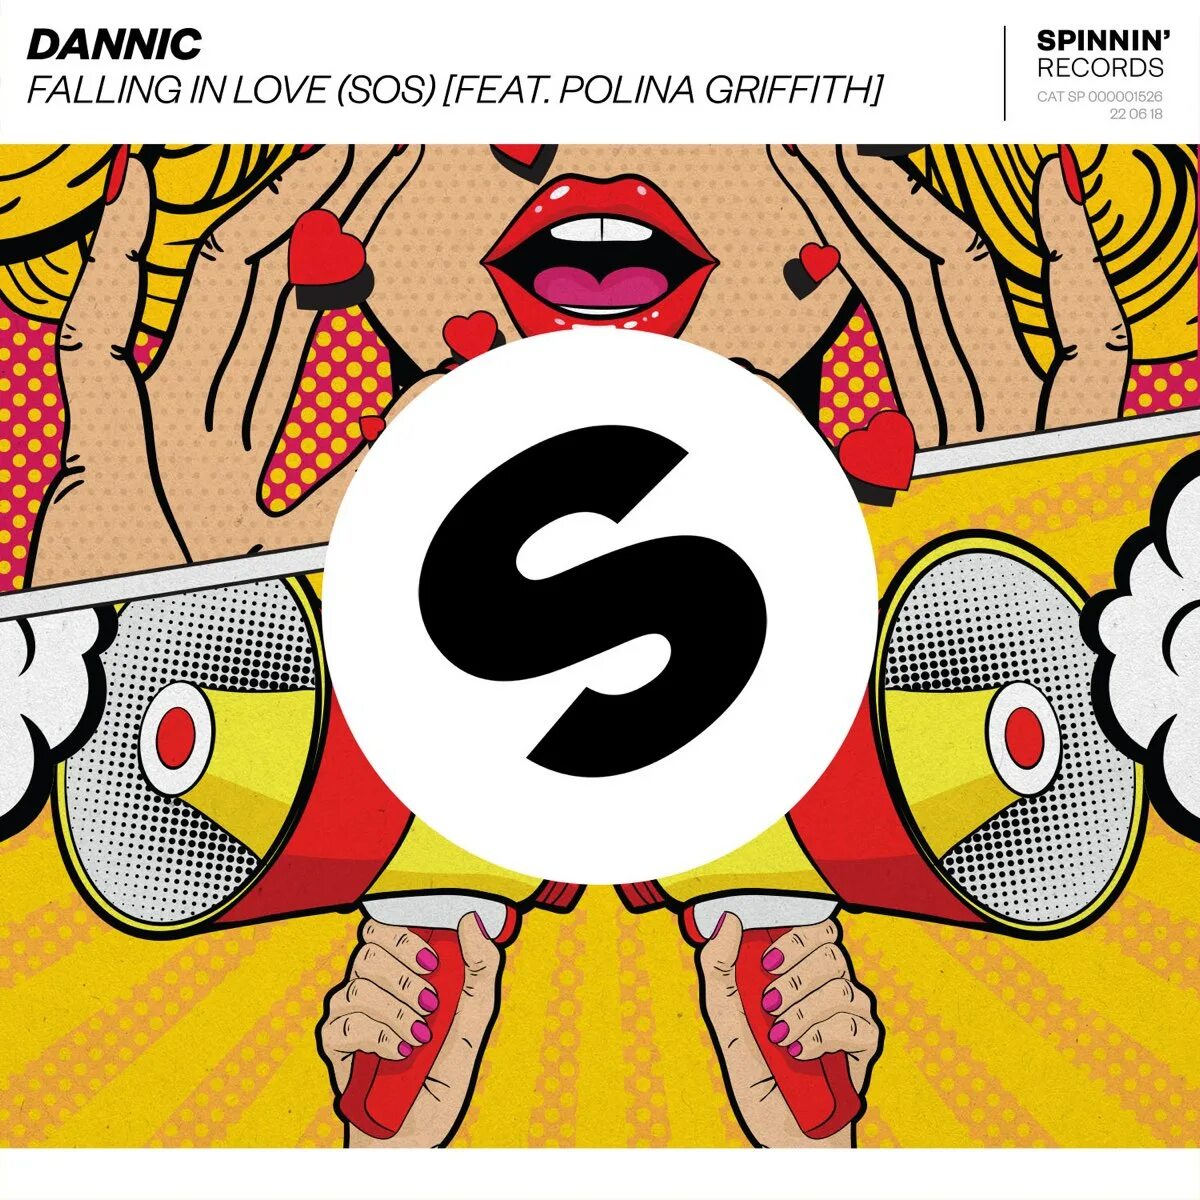 Spinnin records Love. Dannic feat. Polina Griffith - Falling in Love (Extended Mix). Dannic - Falling in Love (SOS). Ralph good feat. Polina Griffith - SOS.